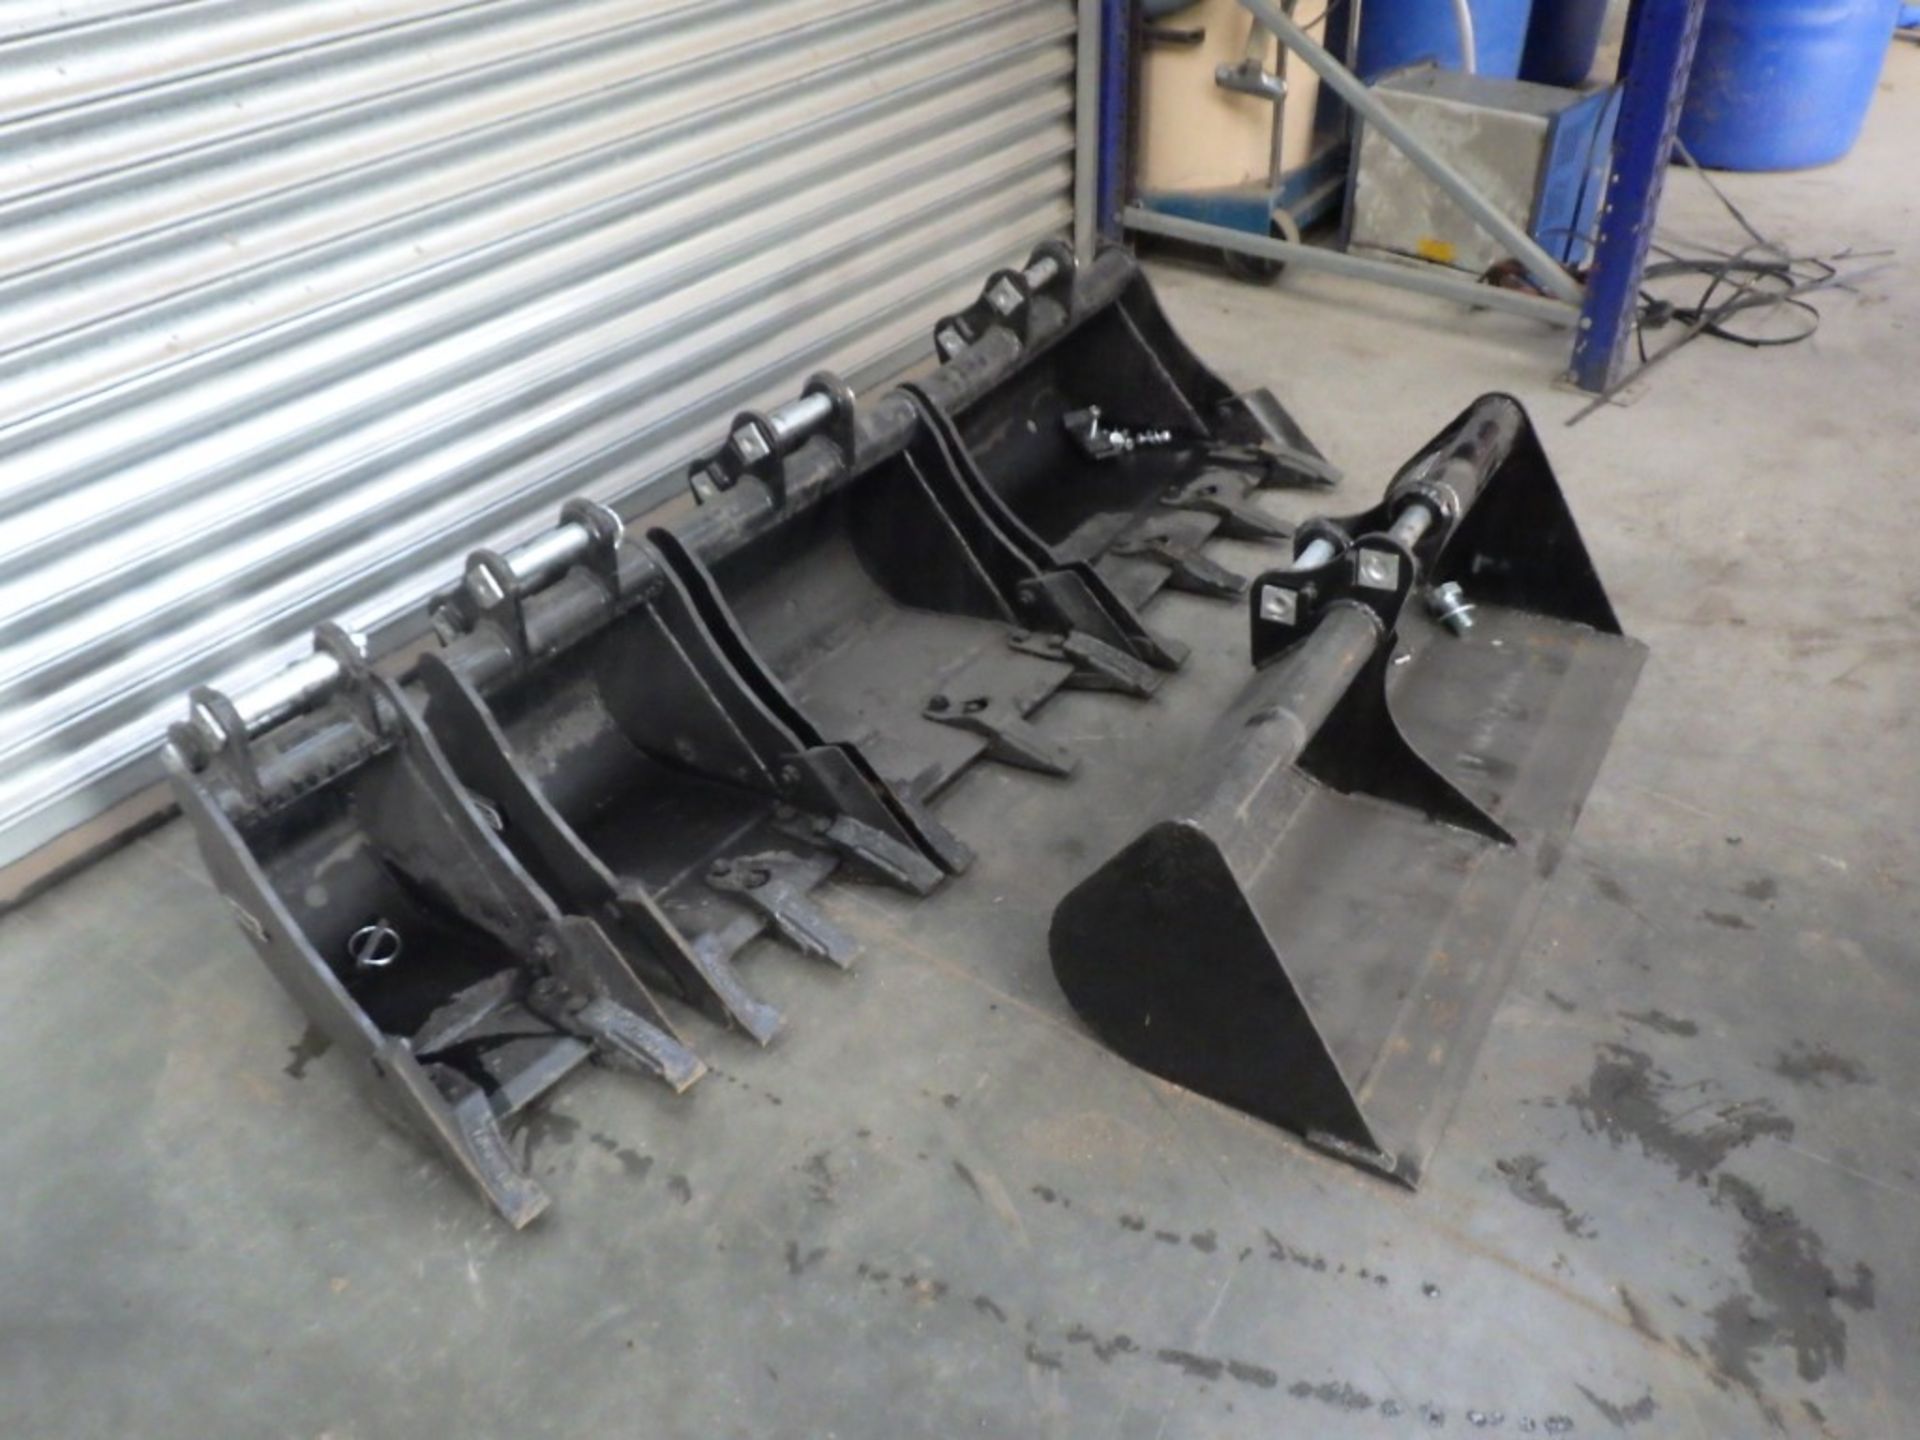 WHITES EXCAVATOR BUCKETS ON 30MM PINS (5 OF) 9.5'' DIGGING, 1' DIGGING, 18'' DIGGING, 2' DIGGING &